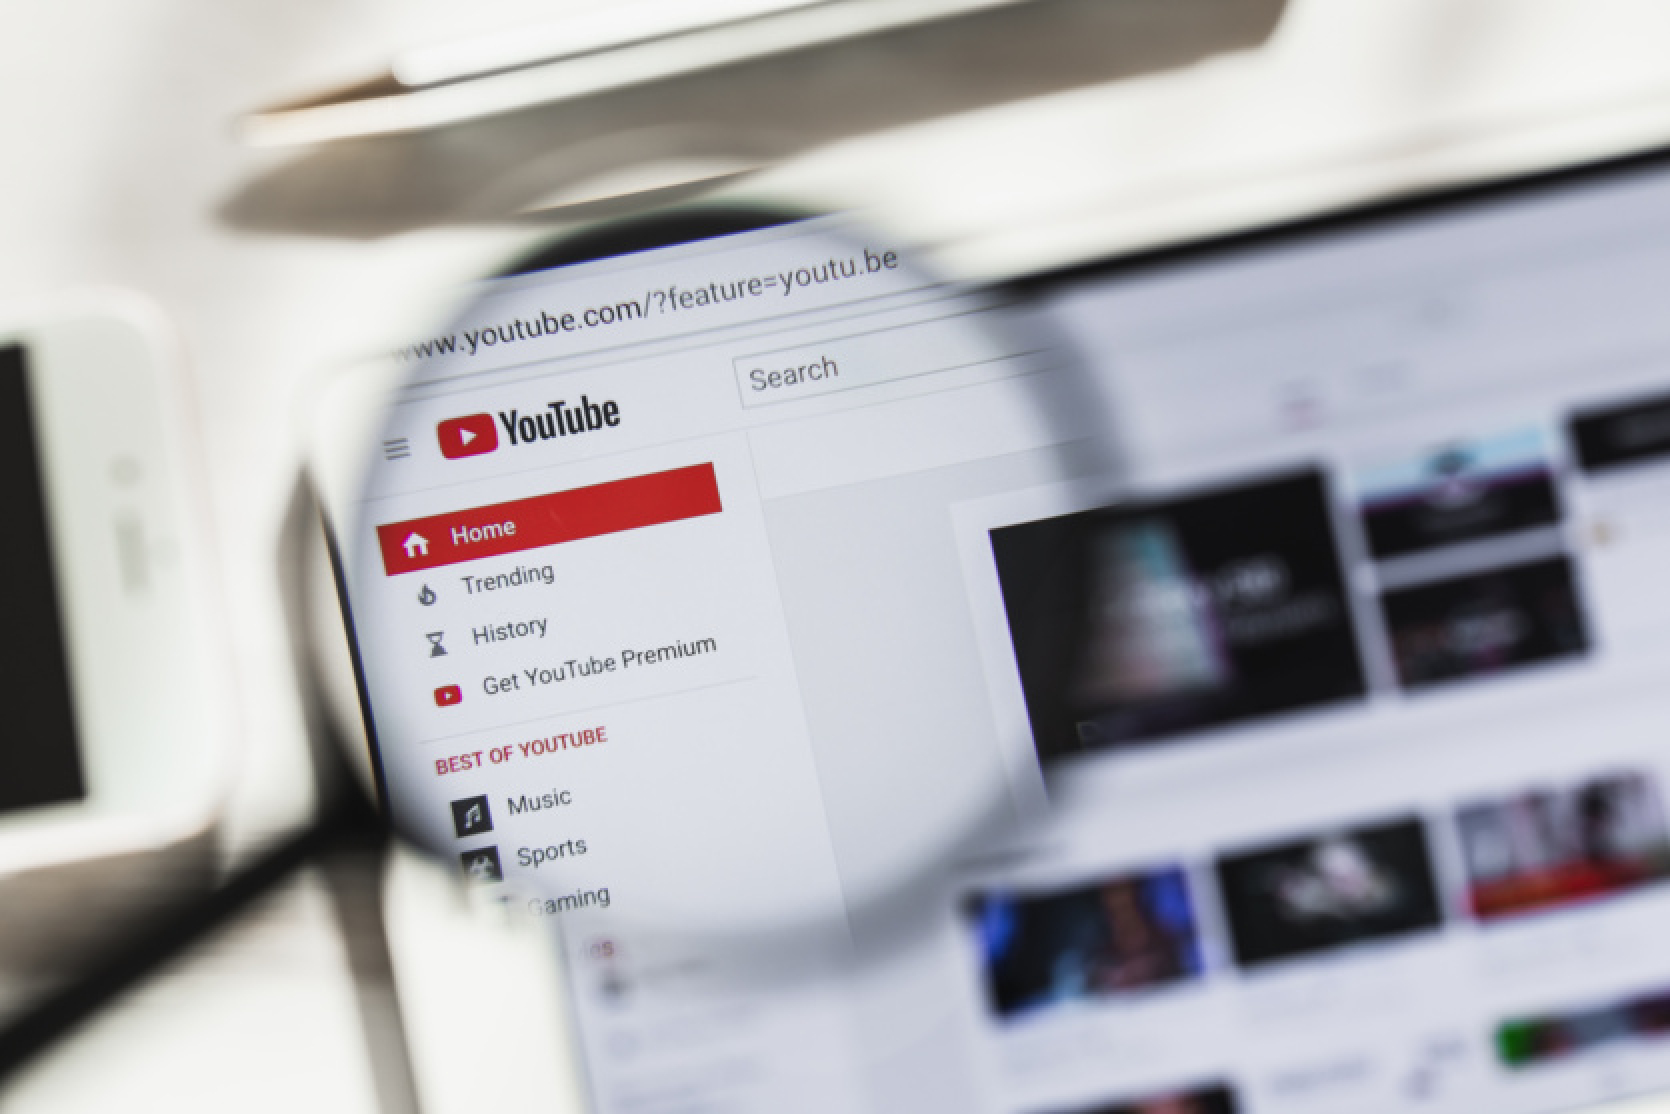 YouTube is testing experimental features: video search with Google Lens, channel QR codes, and AI chat summaries